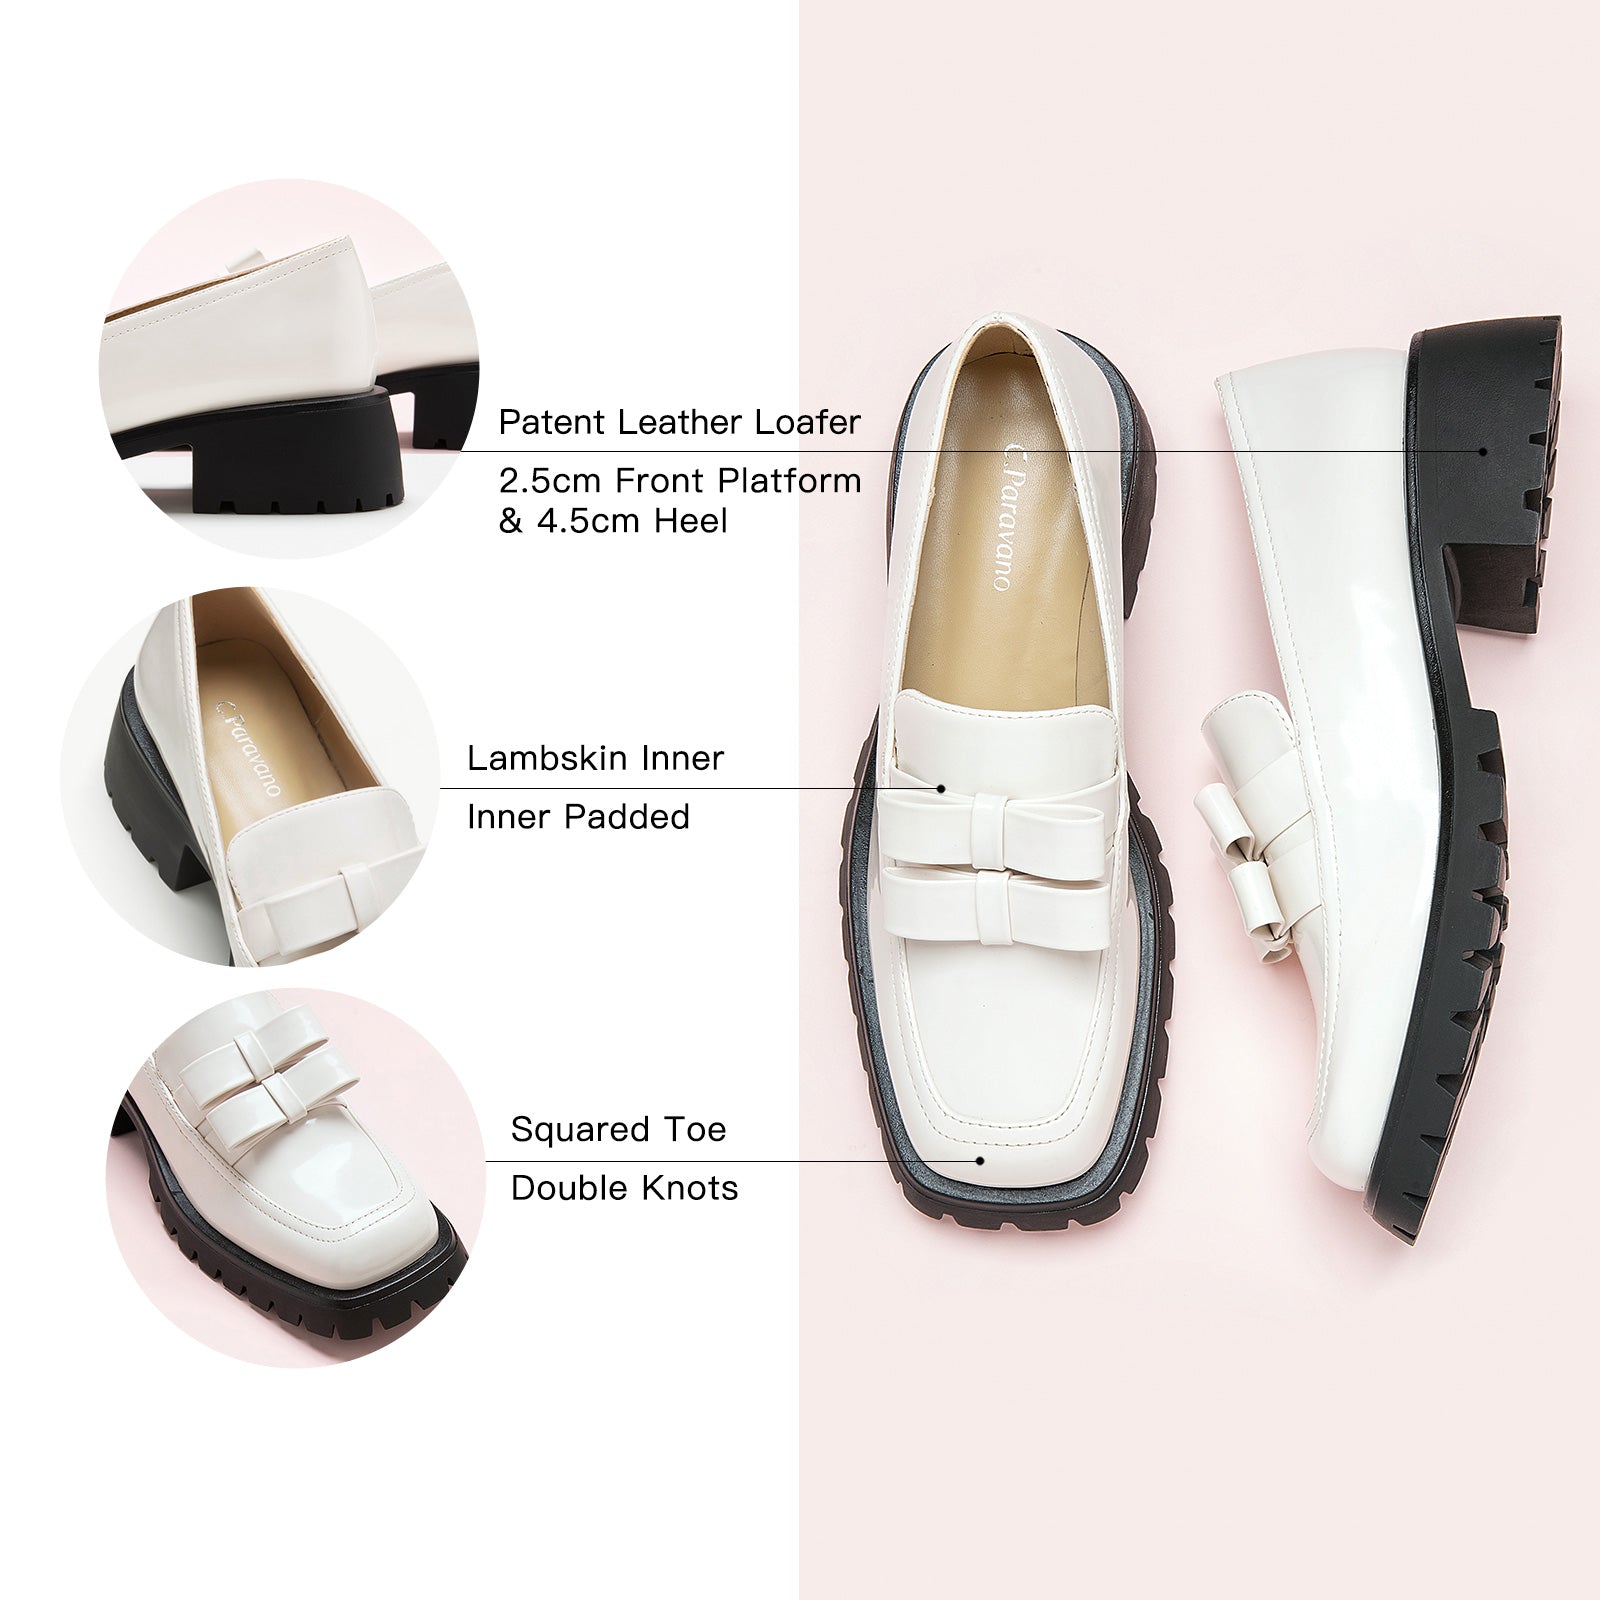 White Platform Loafers featuring double knots, a trendy and comfortable choice for urban adventures